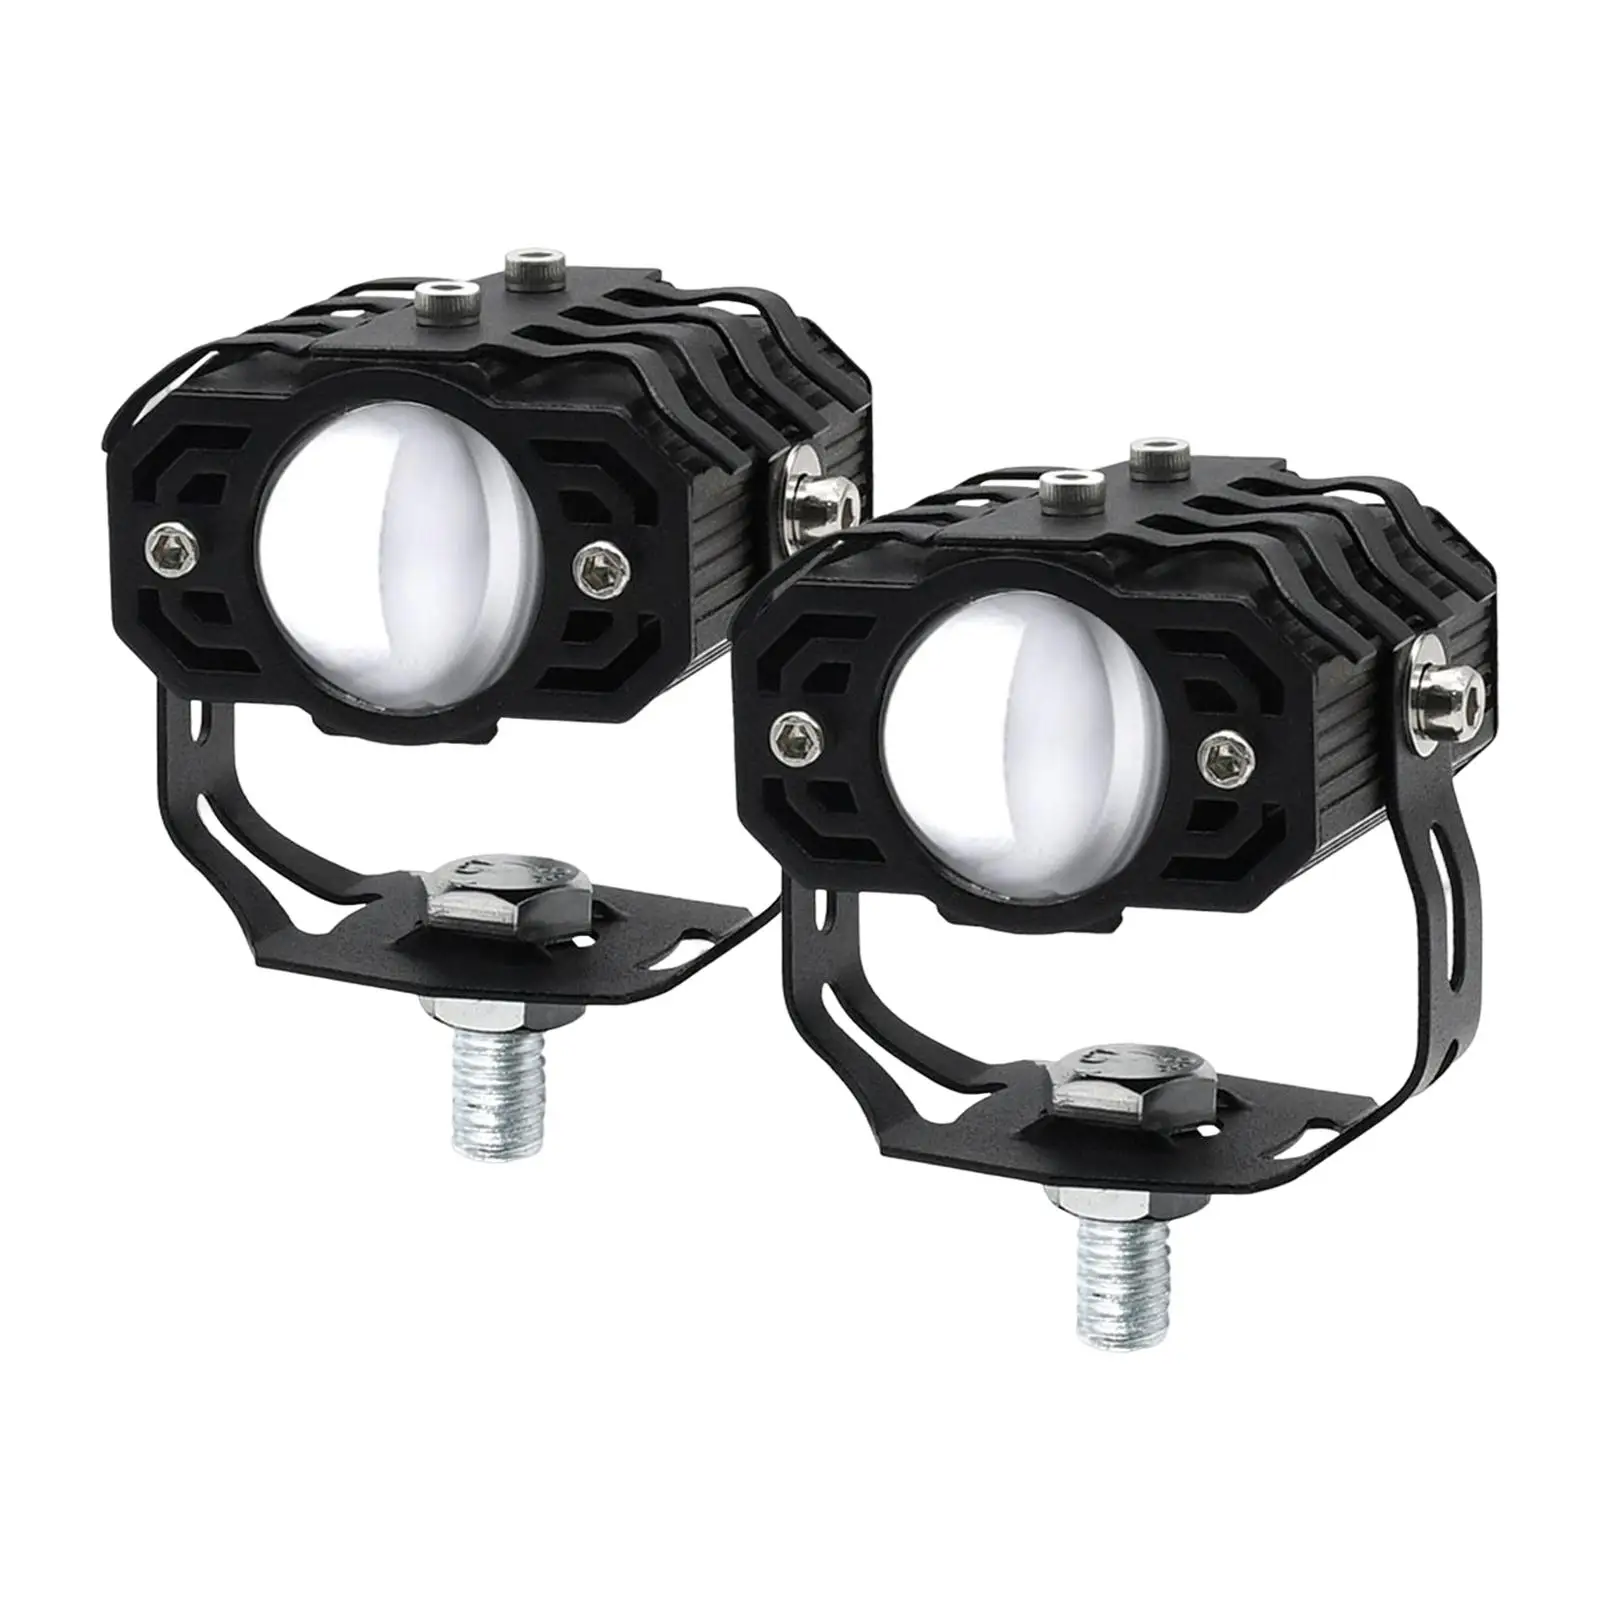 2Pcs Motorcycle Auxiliary Driving Lights Mini Spotlights Front for Car